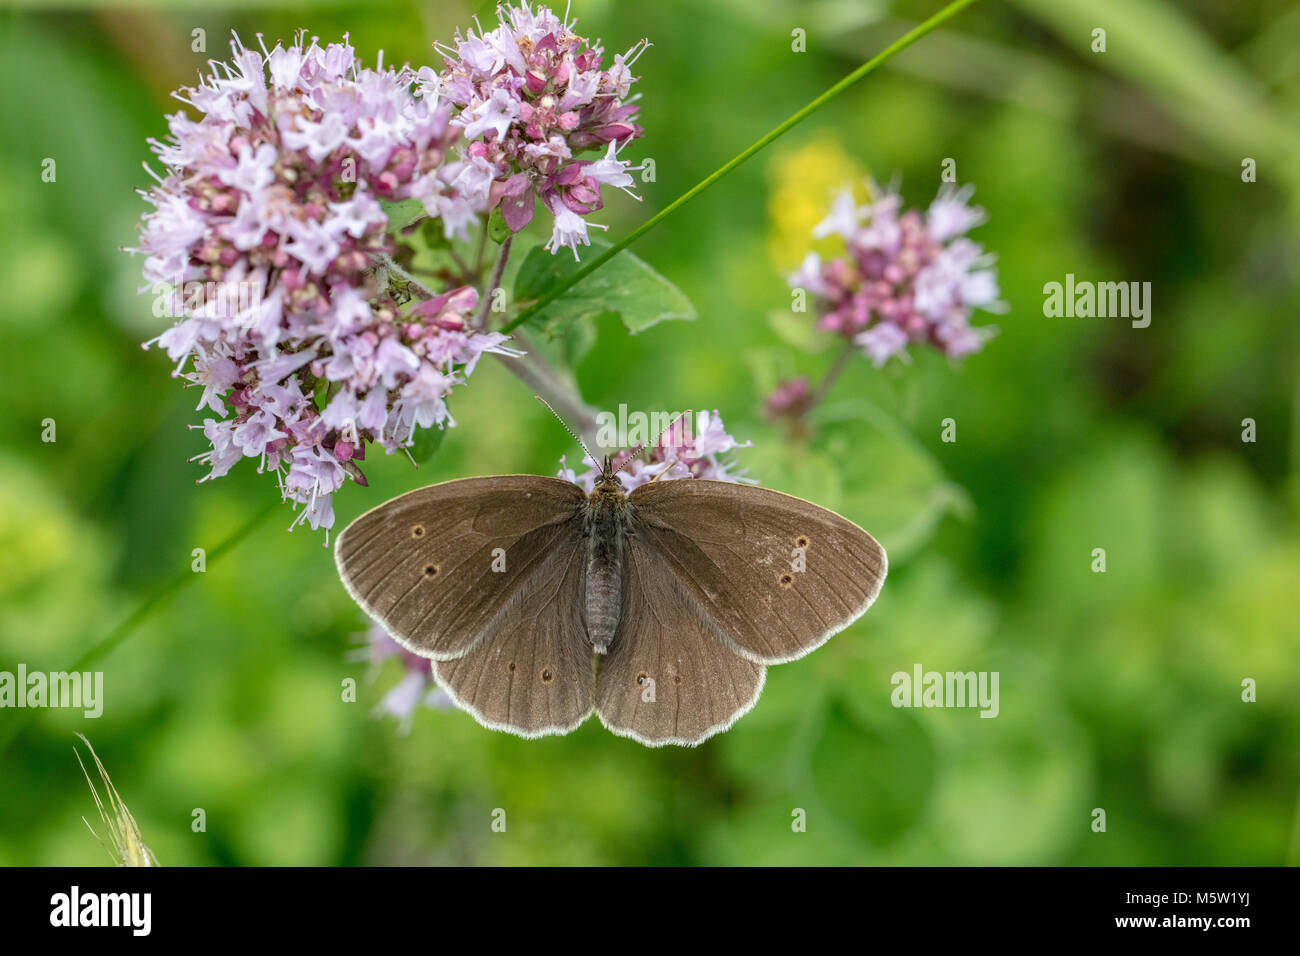 Ringlet butterfly sitting on blossom Stock Photo